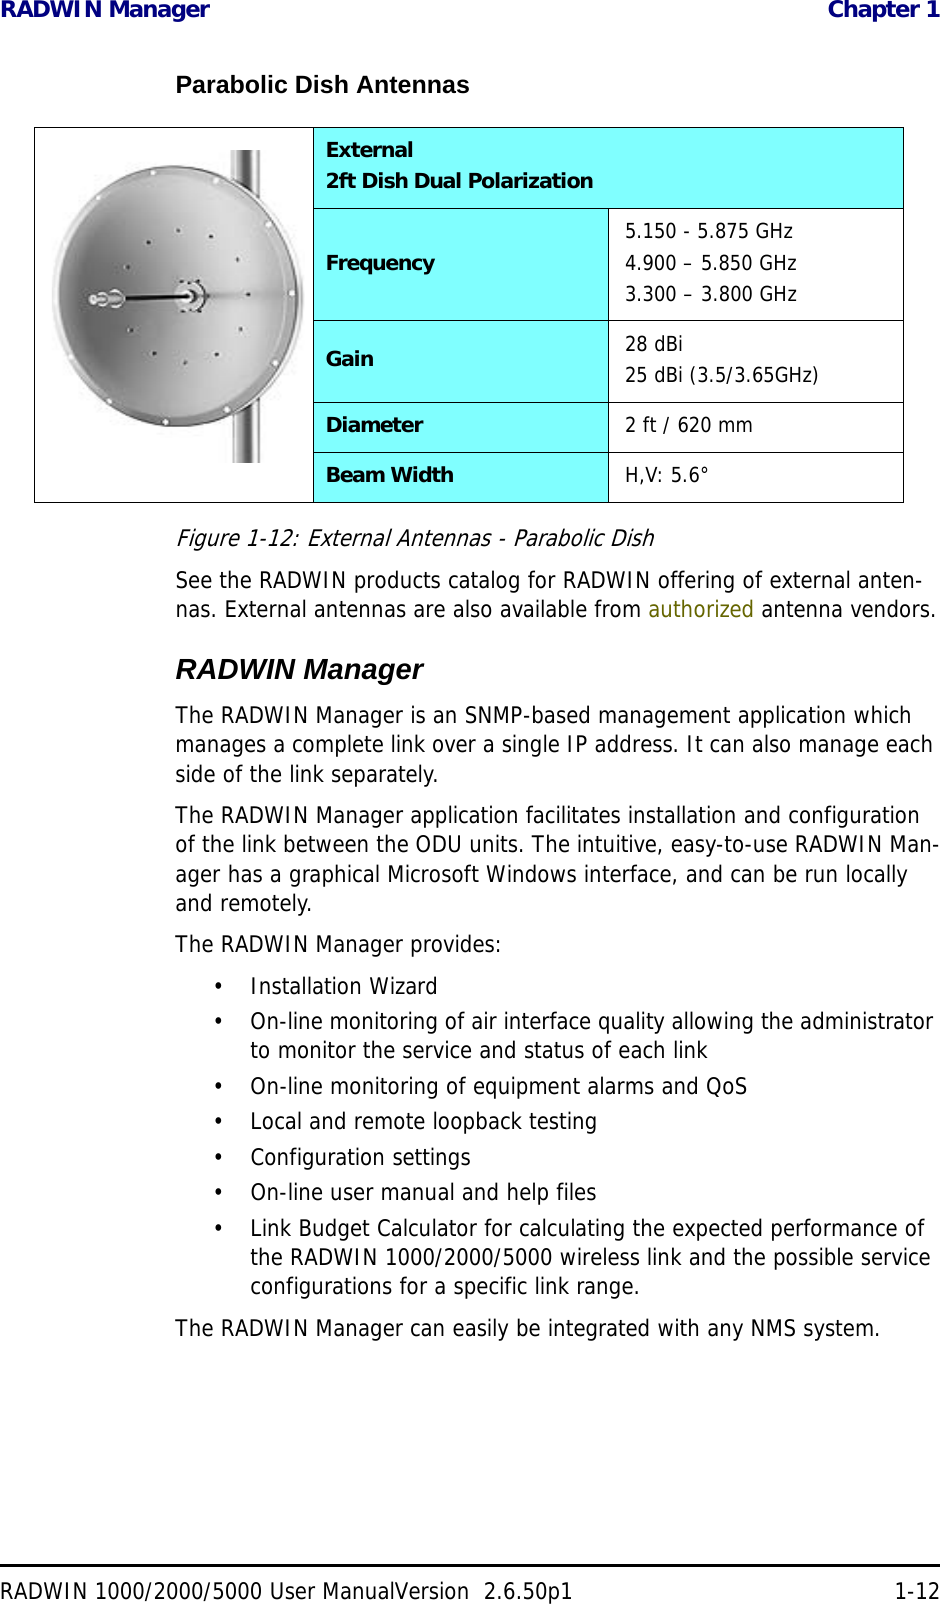 RADWIN Manager  Chapter 1RADWIN 1000/2000/5000 User ManualVersion  2.6.50p1 1-12Parabolic Dish AntennasFigure 1-12: External Antennas - Parabolic DishSee the RADWIN products catalog for RADWIN offering of external anten-nas. External antennas are also available from authorized antenna vendors.RADWIN ManagerThe RADWIN Manager is an SNMP-based management application which manages a complete link over a single IP address. It can also manage each side of the link separately.The RADWIN Manager application facilitates installation and configuration of the link between the ODU units. The intuitive, easy-to-use RADWIN Man-ager has a graphical Microsoft Windows interface, and can be run locally and remotely. The RADWIN Manager provides:• Installation Wizard• On-line monitoring of air interface quality allowing the administrator to monitor the service and status of each link• On-line monitoring of equipment alarms and QoS• Local and remote loopback testing• Configuration settings• On-line user manual and help files• Link Budget Calculator for calculating the expected performance of the RADWIN 1000/2000/5000 wireless link and the possible service configurations for a specific link range.The RADWIN Manager can easily be integrated with any NMS system.External2ft Dish Dual PolarizationFrequency 5.150 - 5.875 GHz4.900 – 5.850 GHz3.300 – 3.800 GHzGain 28 dBi25 dBi (3.5/3.65GHz)Diameter 2 ft / 620 mmBeam Width H,V: 5.6°